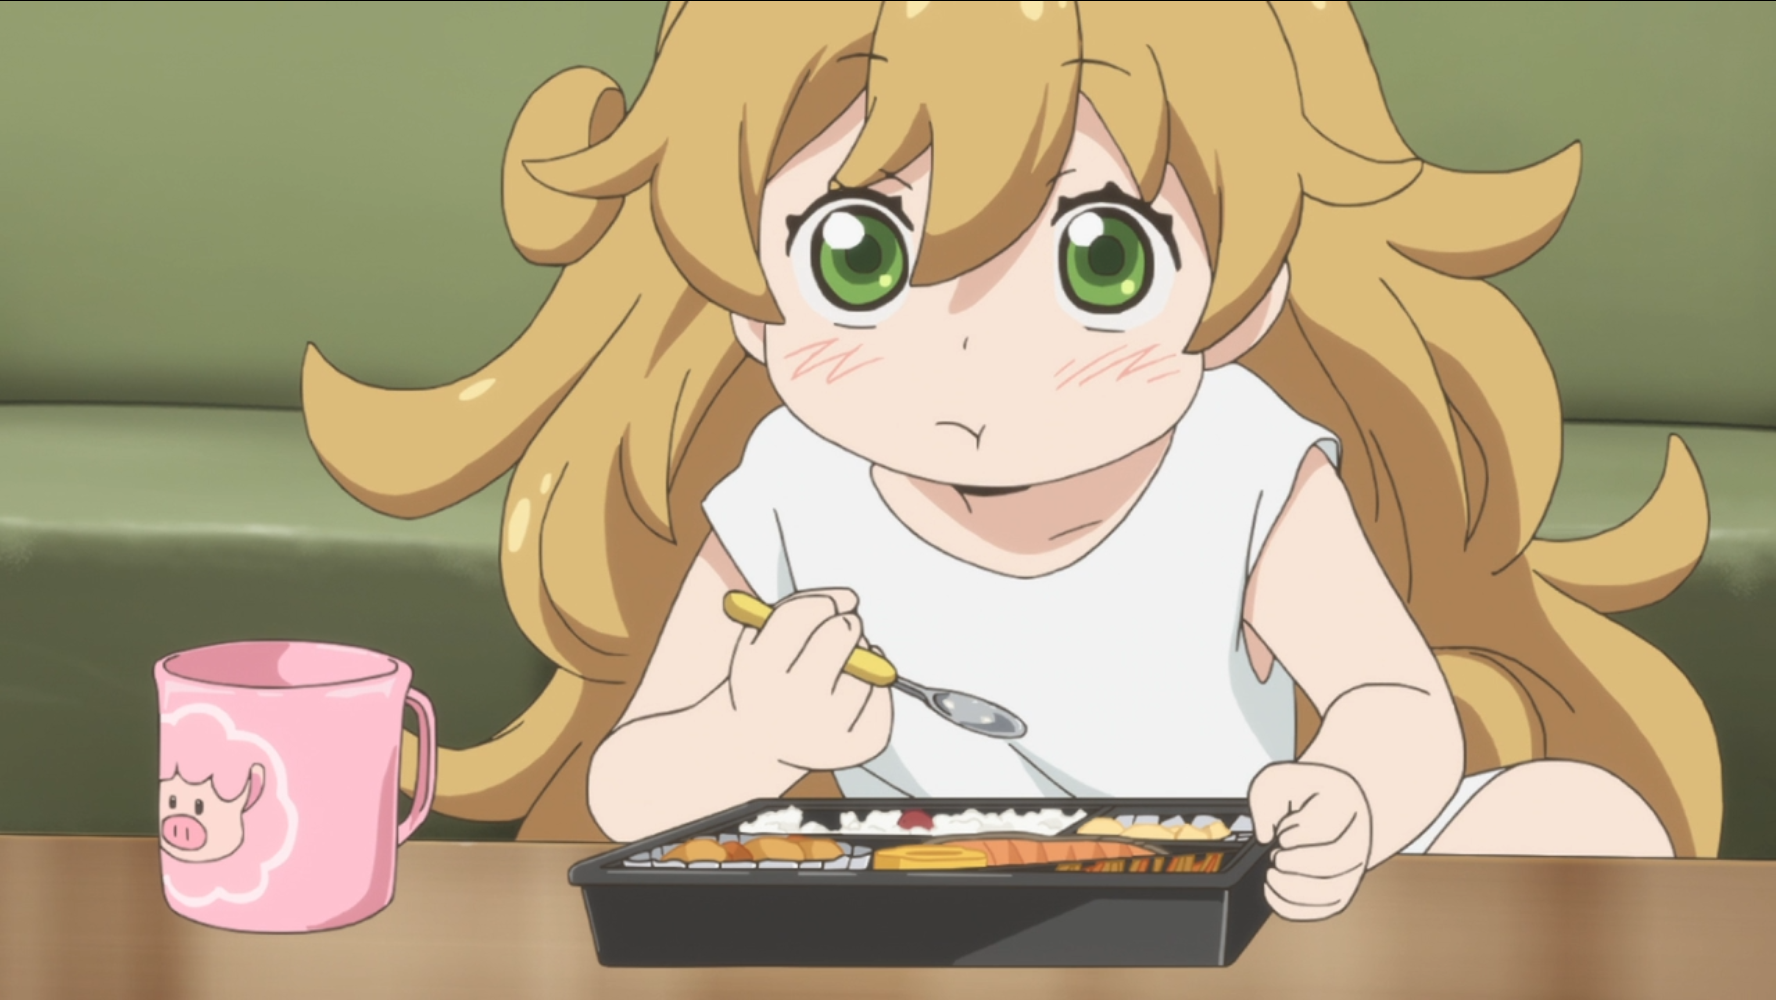 Prior to her father taking up cooking, Tsumugi half-heartedly picks at a convenience store dinner while watching TV in a scene from the 2016 sweetness & lightning TV anime.